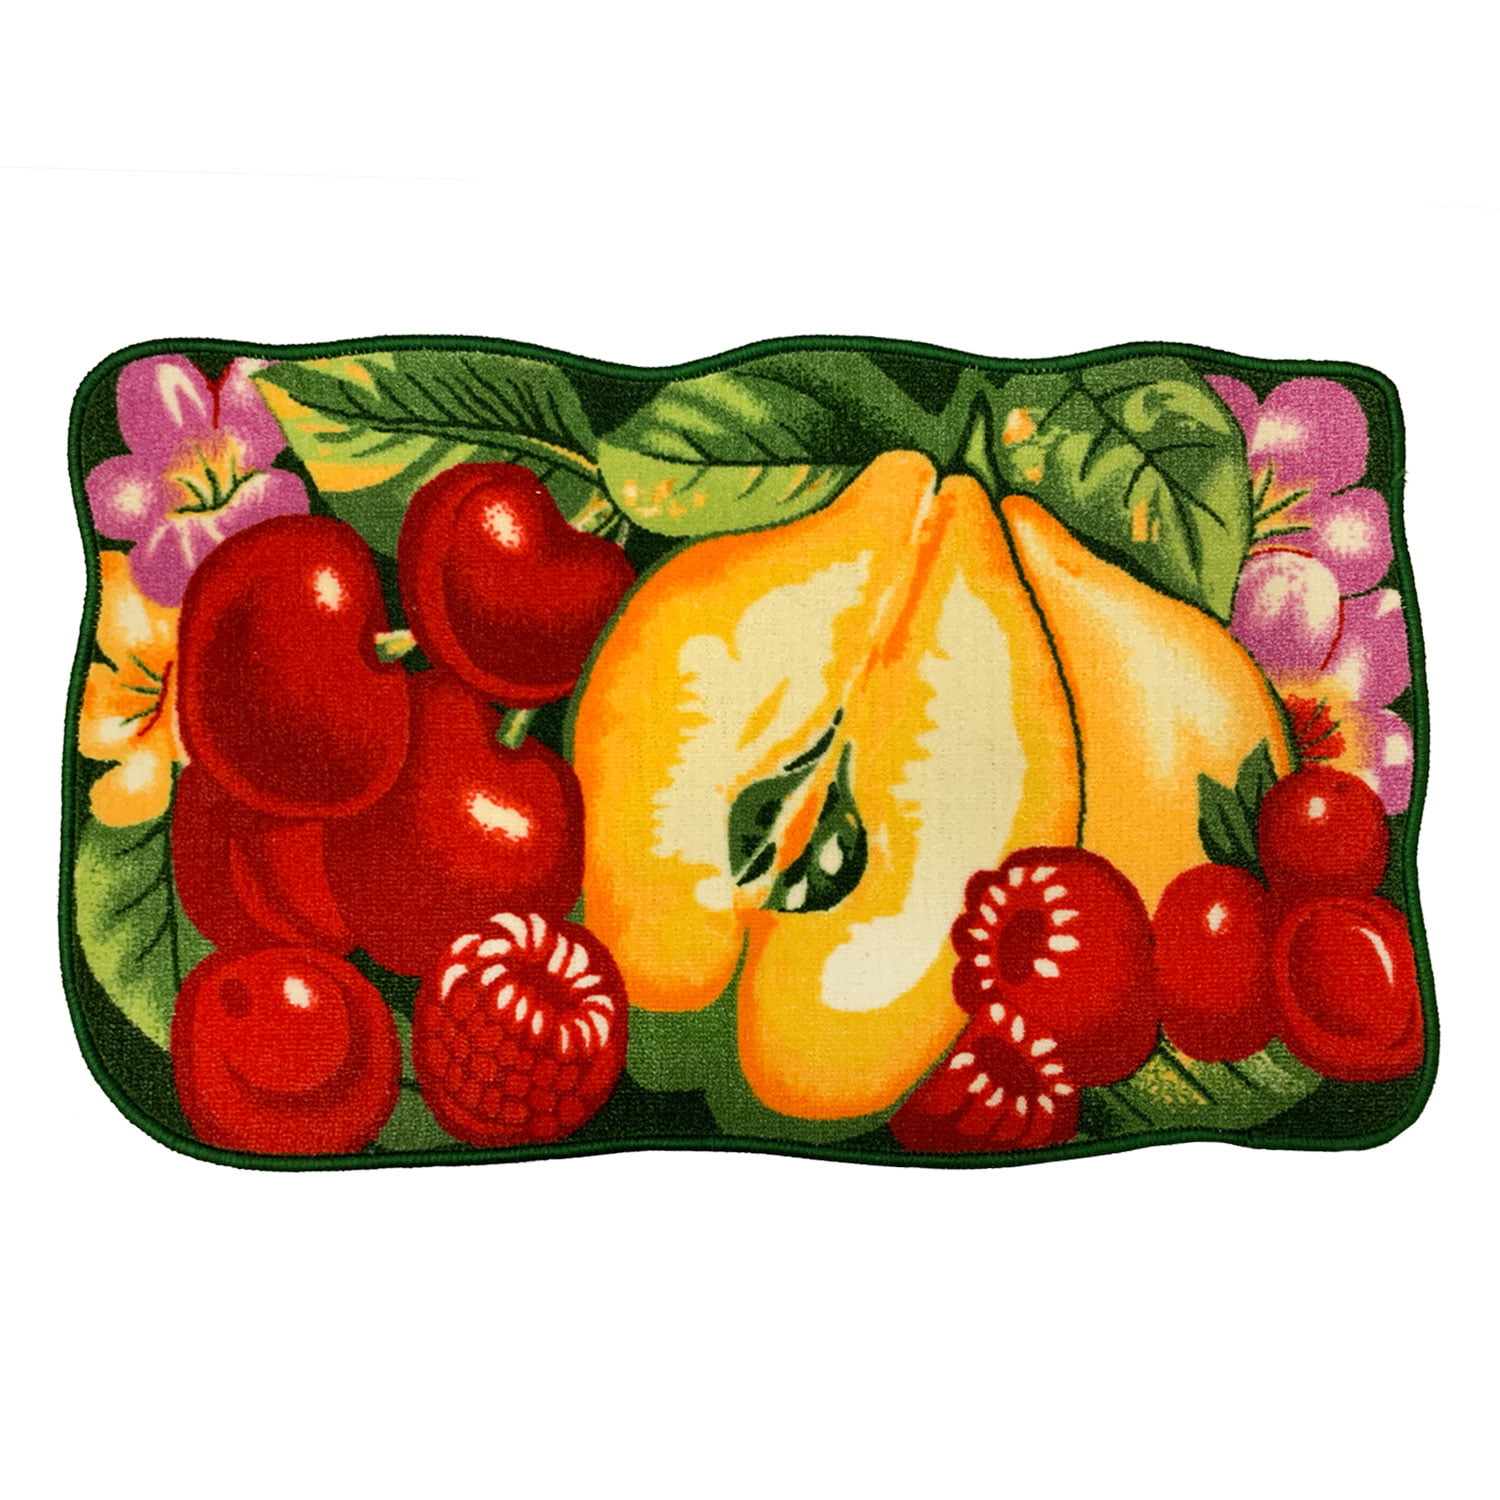 by RT 18"x 30" PRINTED KITCHEN RUG BASKET OF VEGETABLES rectangle 